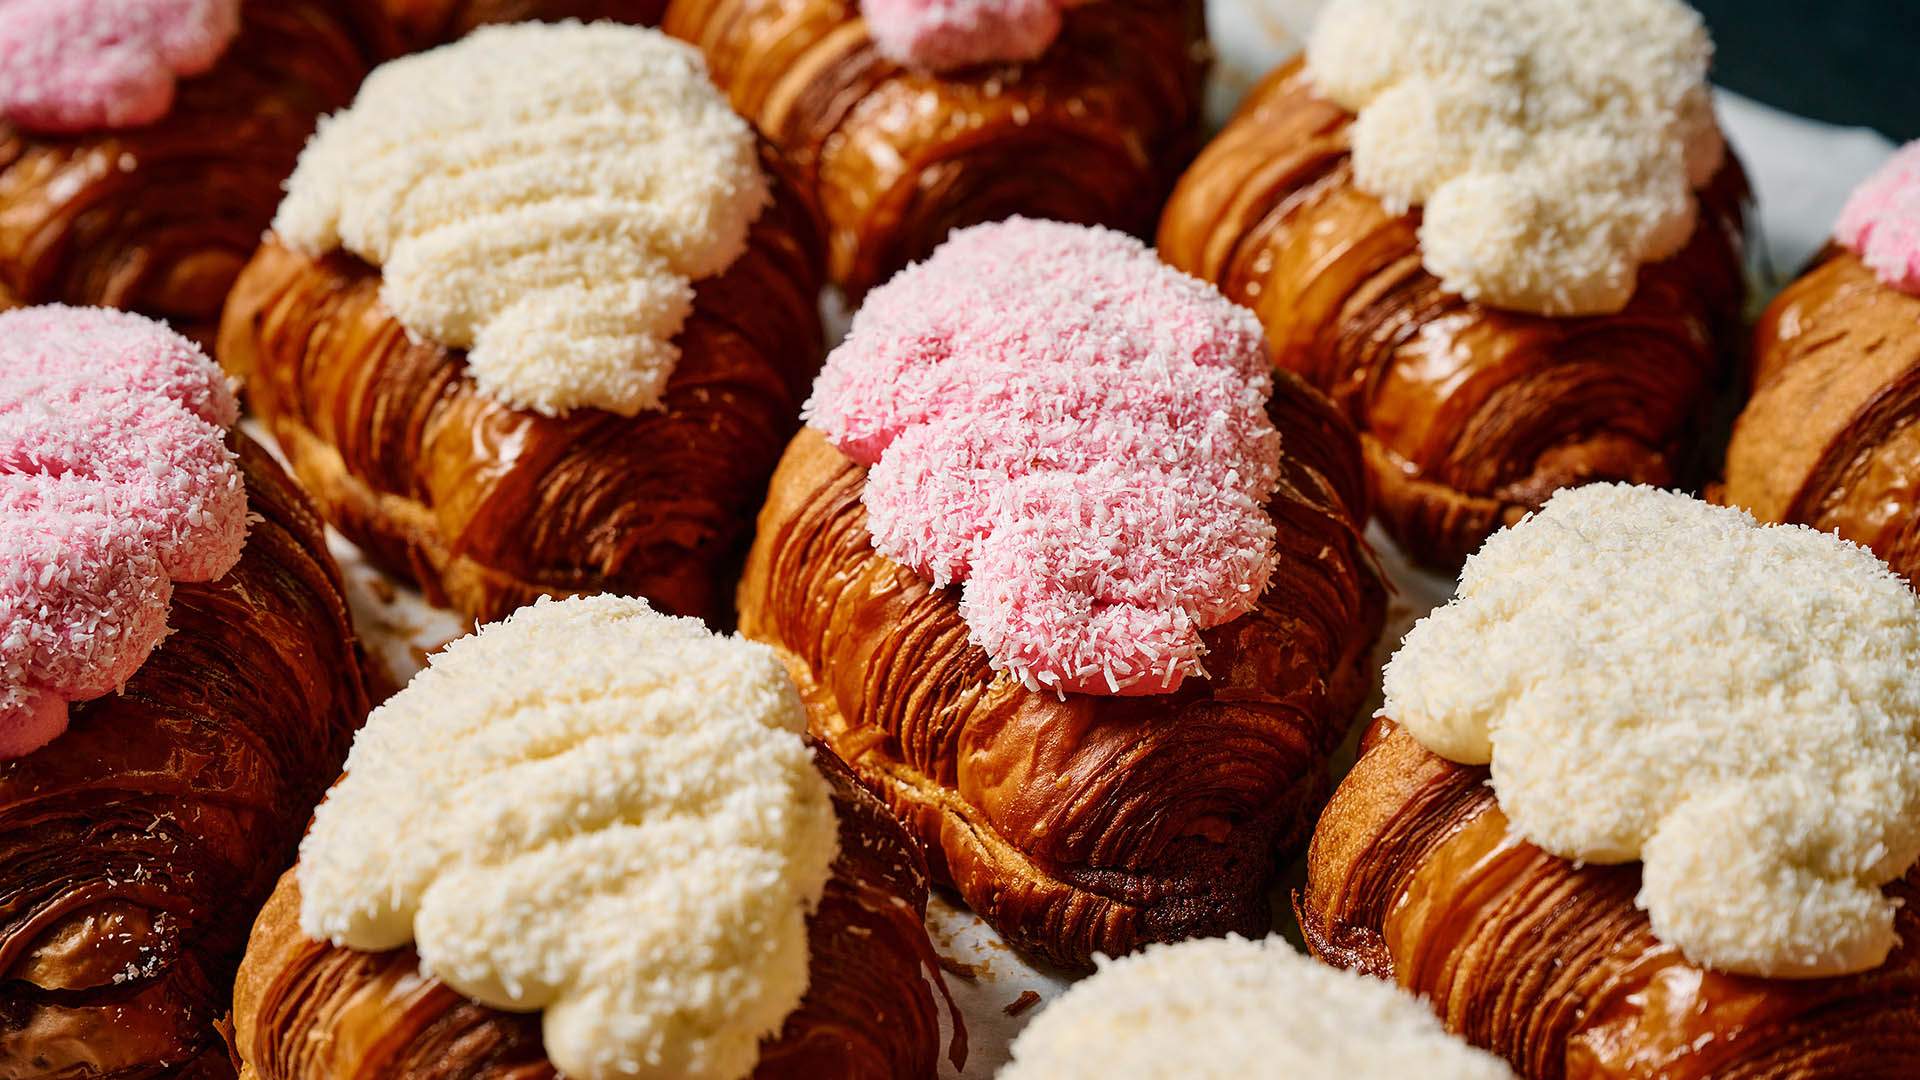 Lune's Limited-Edition Twice-Baked Finger Bun Croissants Are Back to Make April Even Tastier